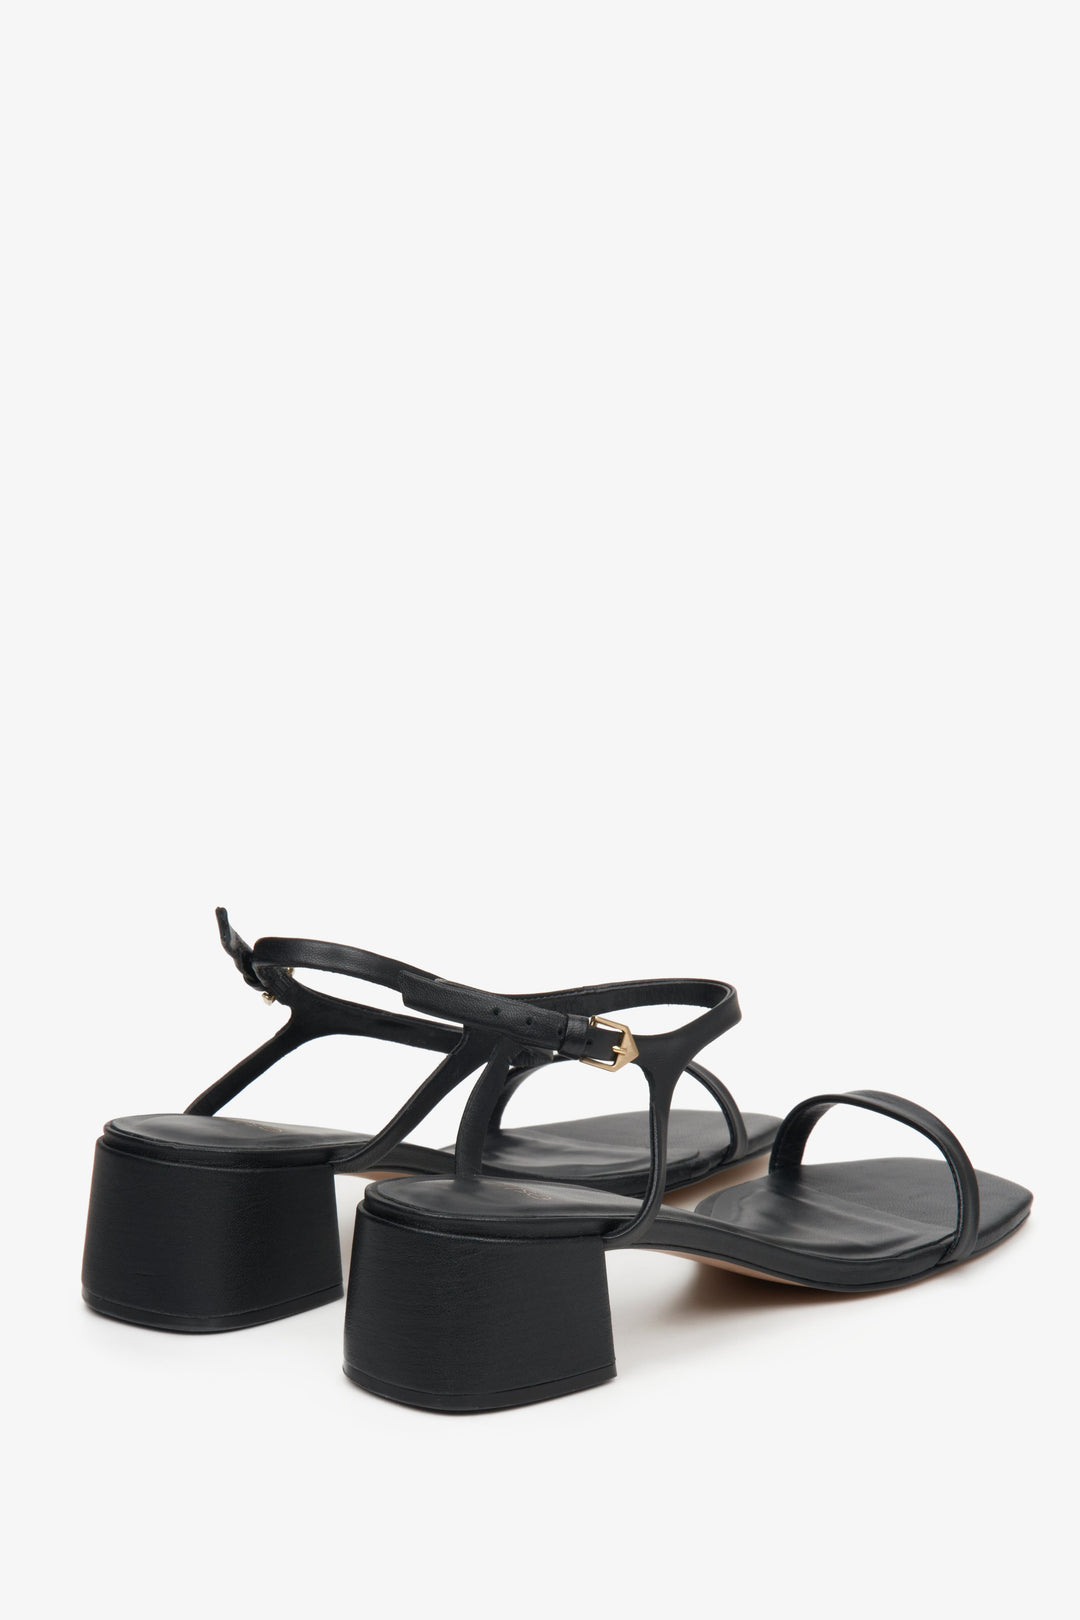 Comfortable women's black sandals made of genuine leather by Estro - close-up on the heel.